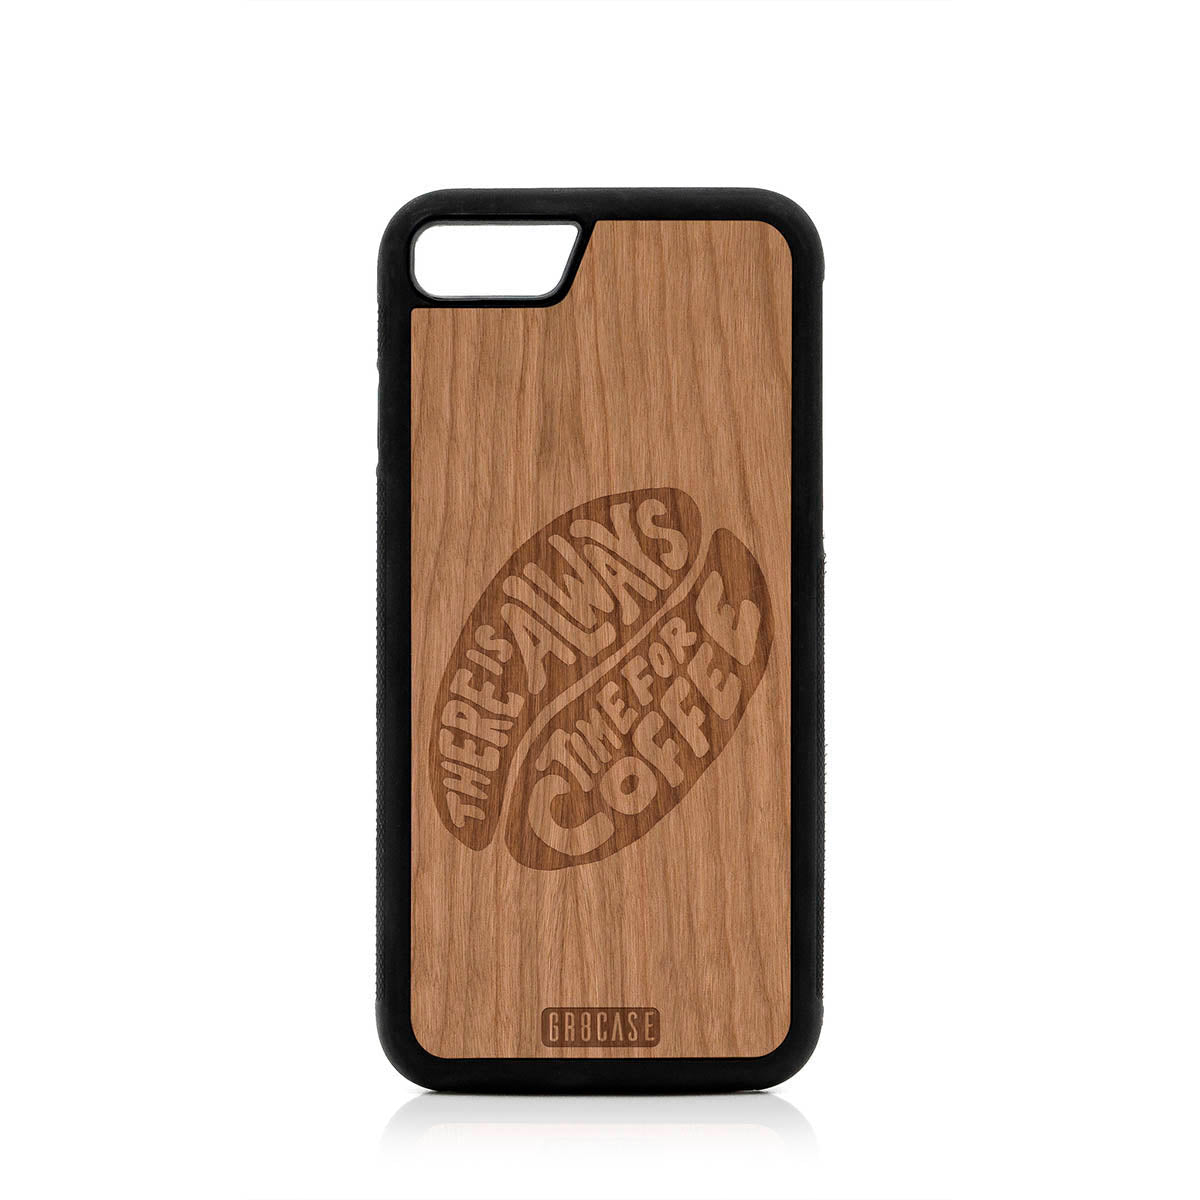 There Is Always Time For Coffee Design Wood Case For iPhone 7/8